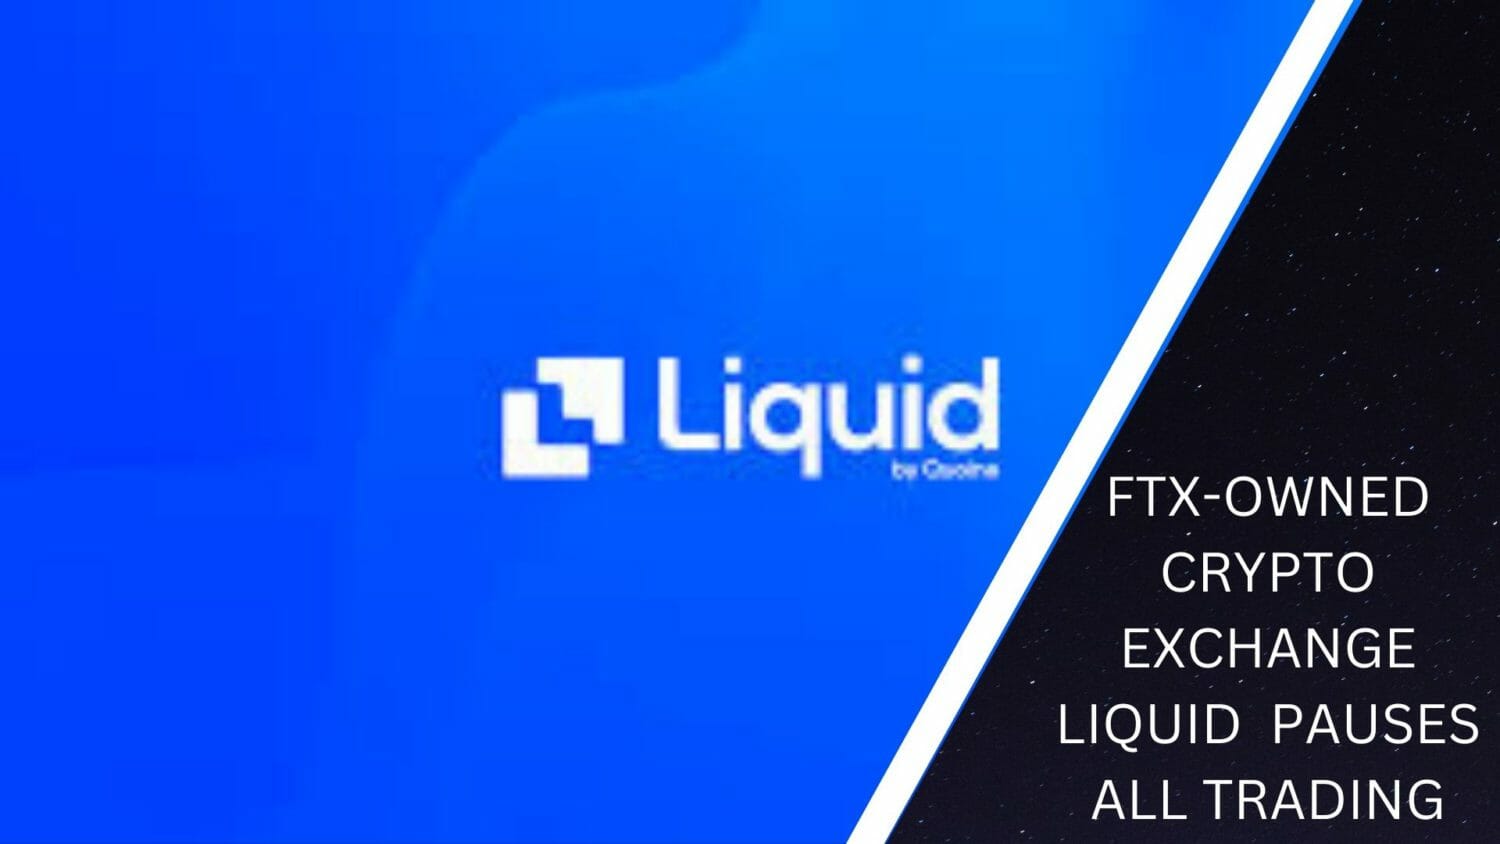 Ftx-Owned Crypto Exchange Liquid Pauses All Trading